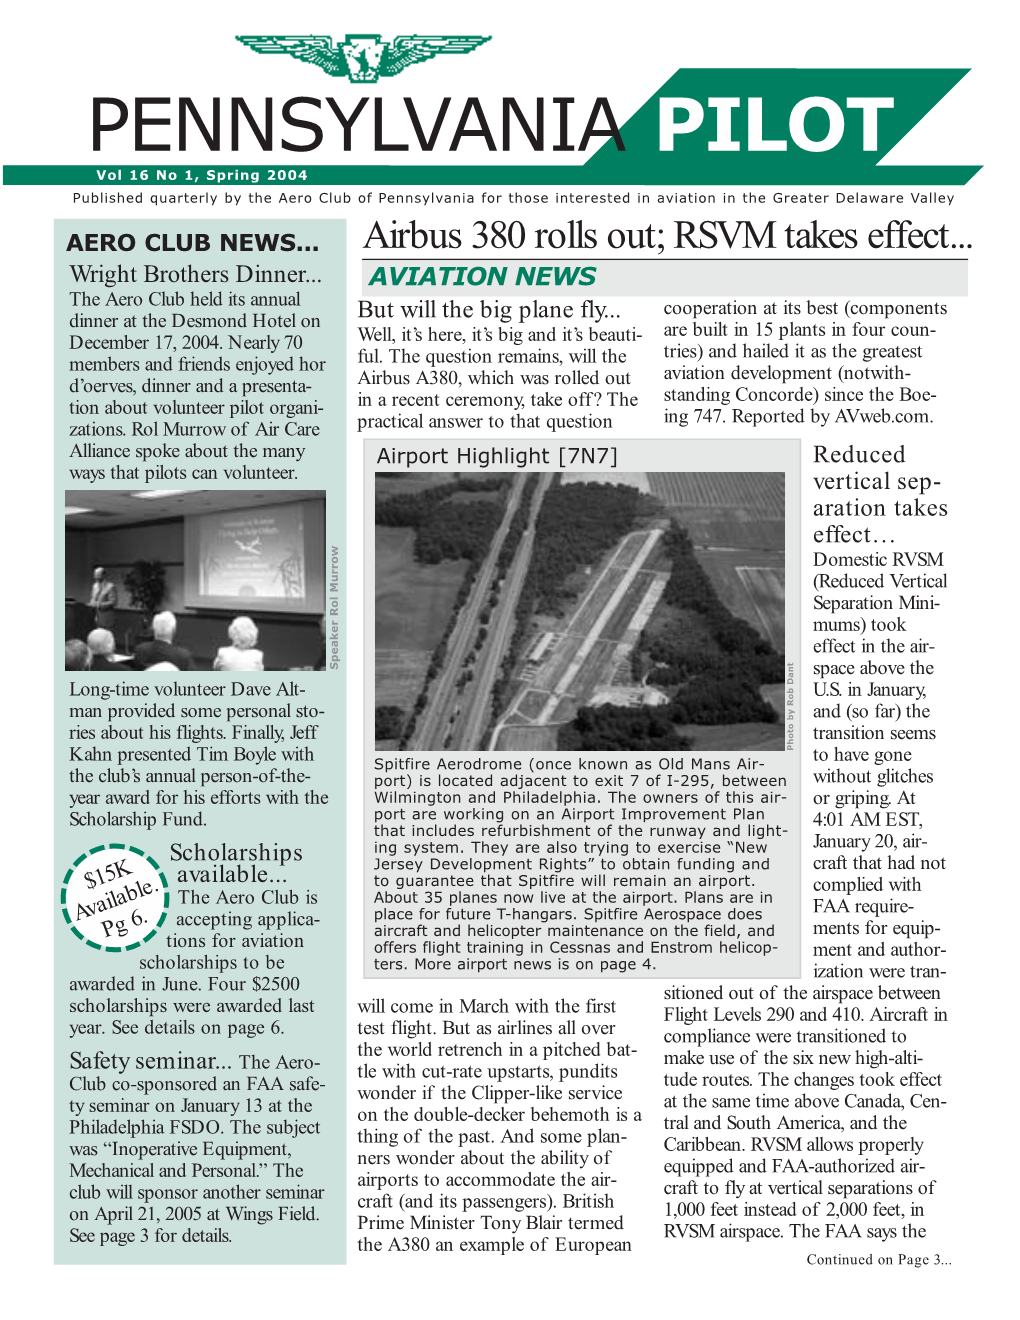 Spring 2004 Published Quarterly by the Aero Club of Pennsylvania for Those Interested in Aviation in the Greater Delaware Valley